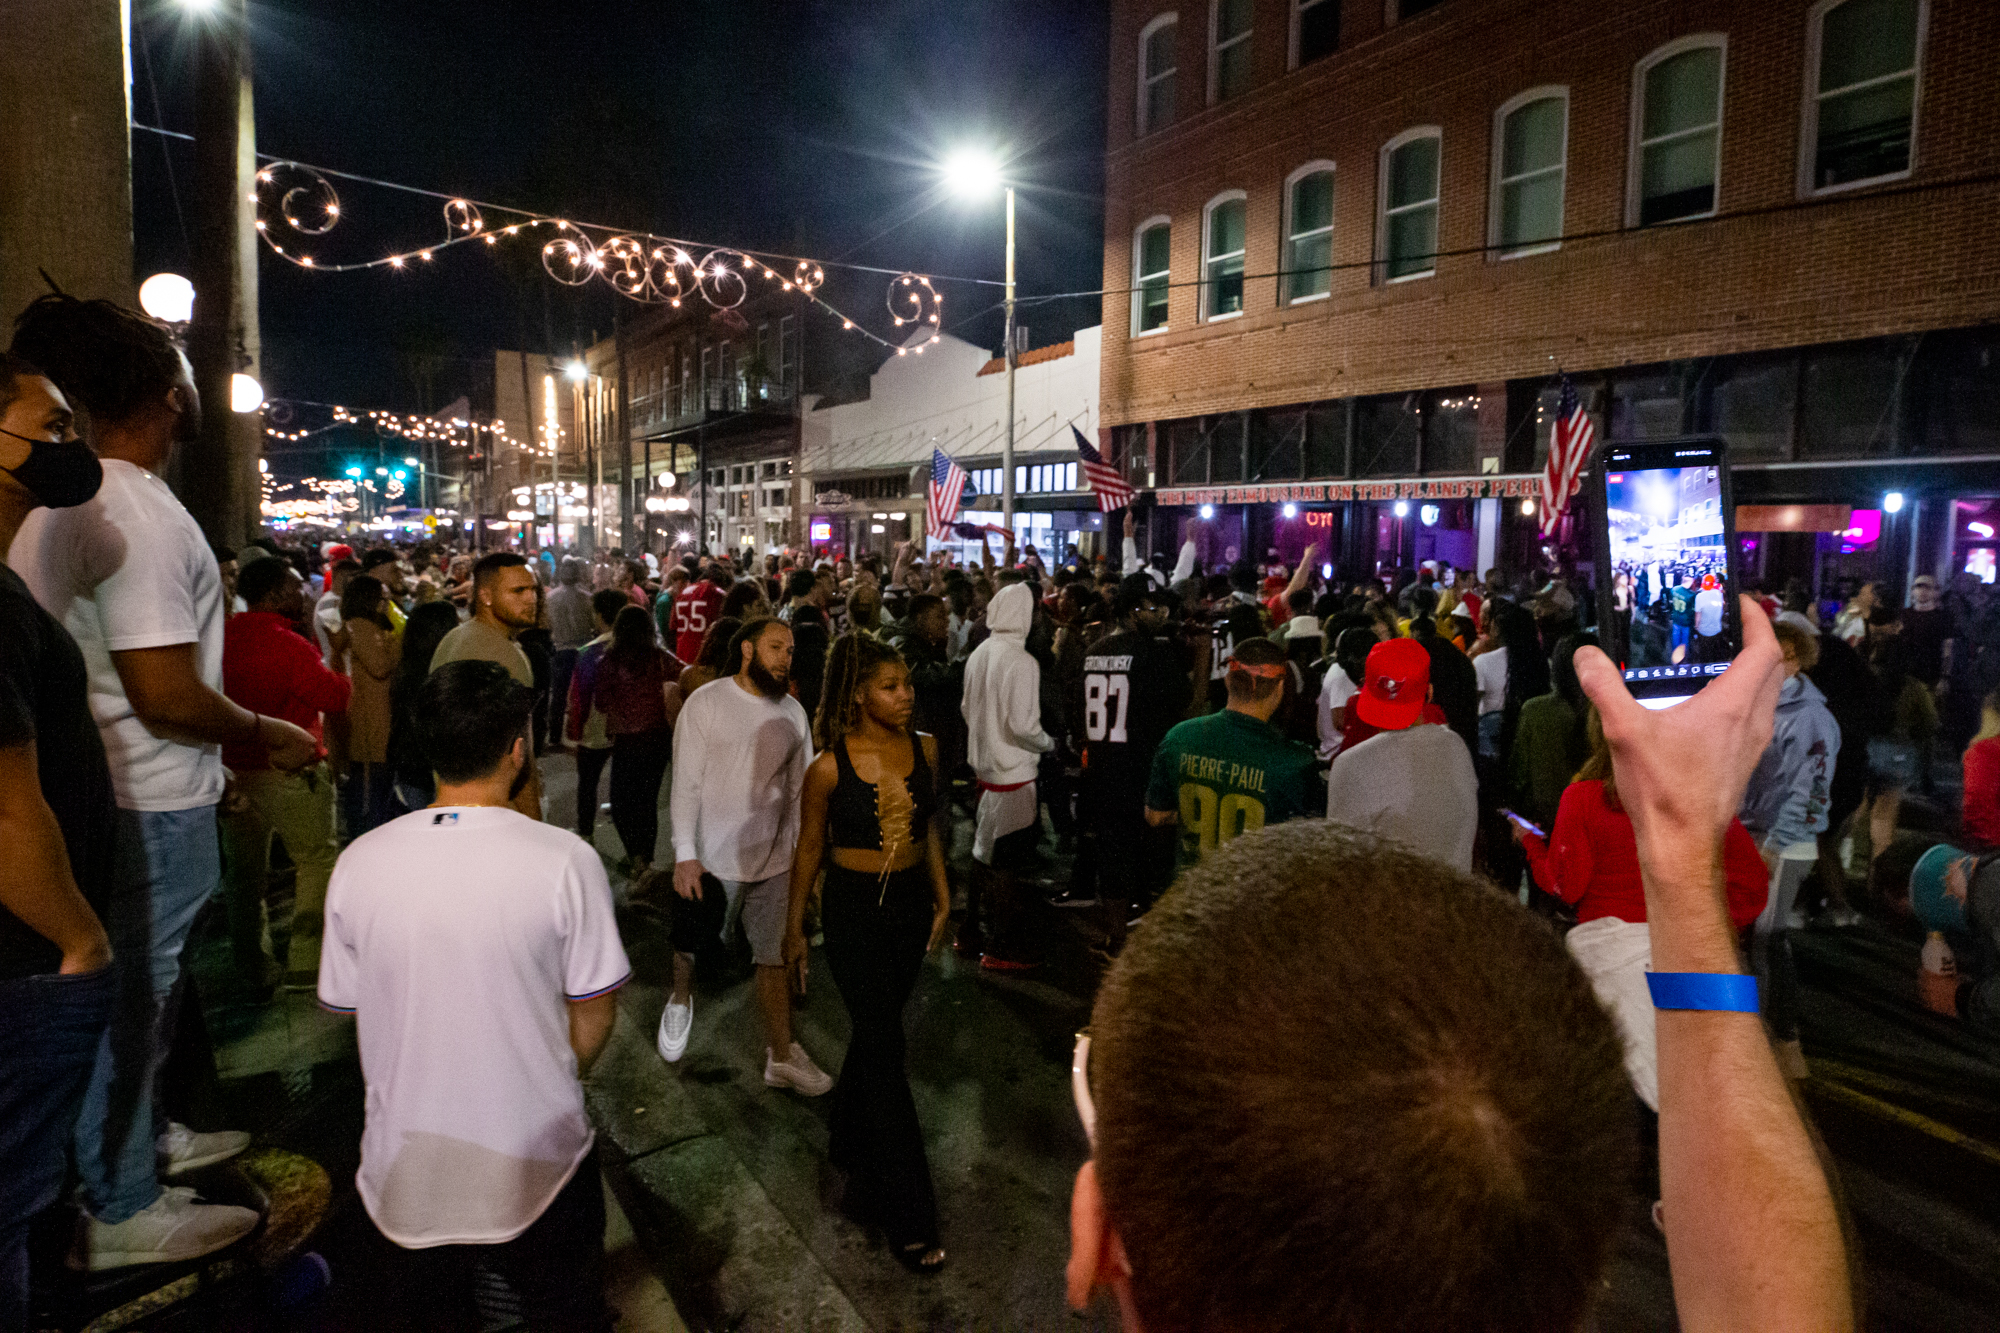 PHOTO: Fans celebrate in the streets of Ybor City in Tampa, Fla., after the Tampa Bay Buccaneers beat the Kansas City Chiefs in Super Bowl LV, Feb. 7, 2021.